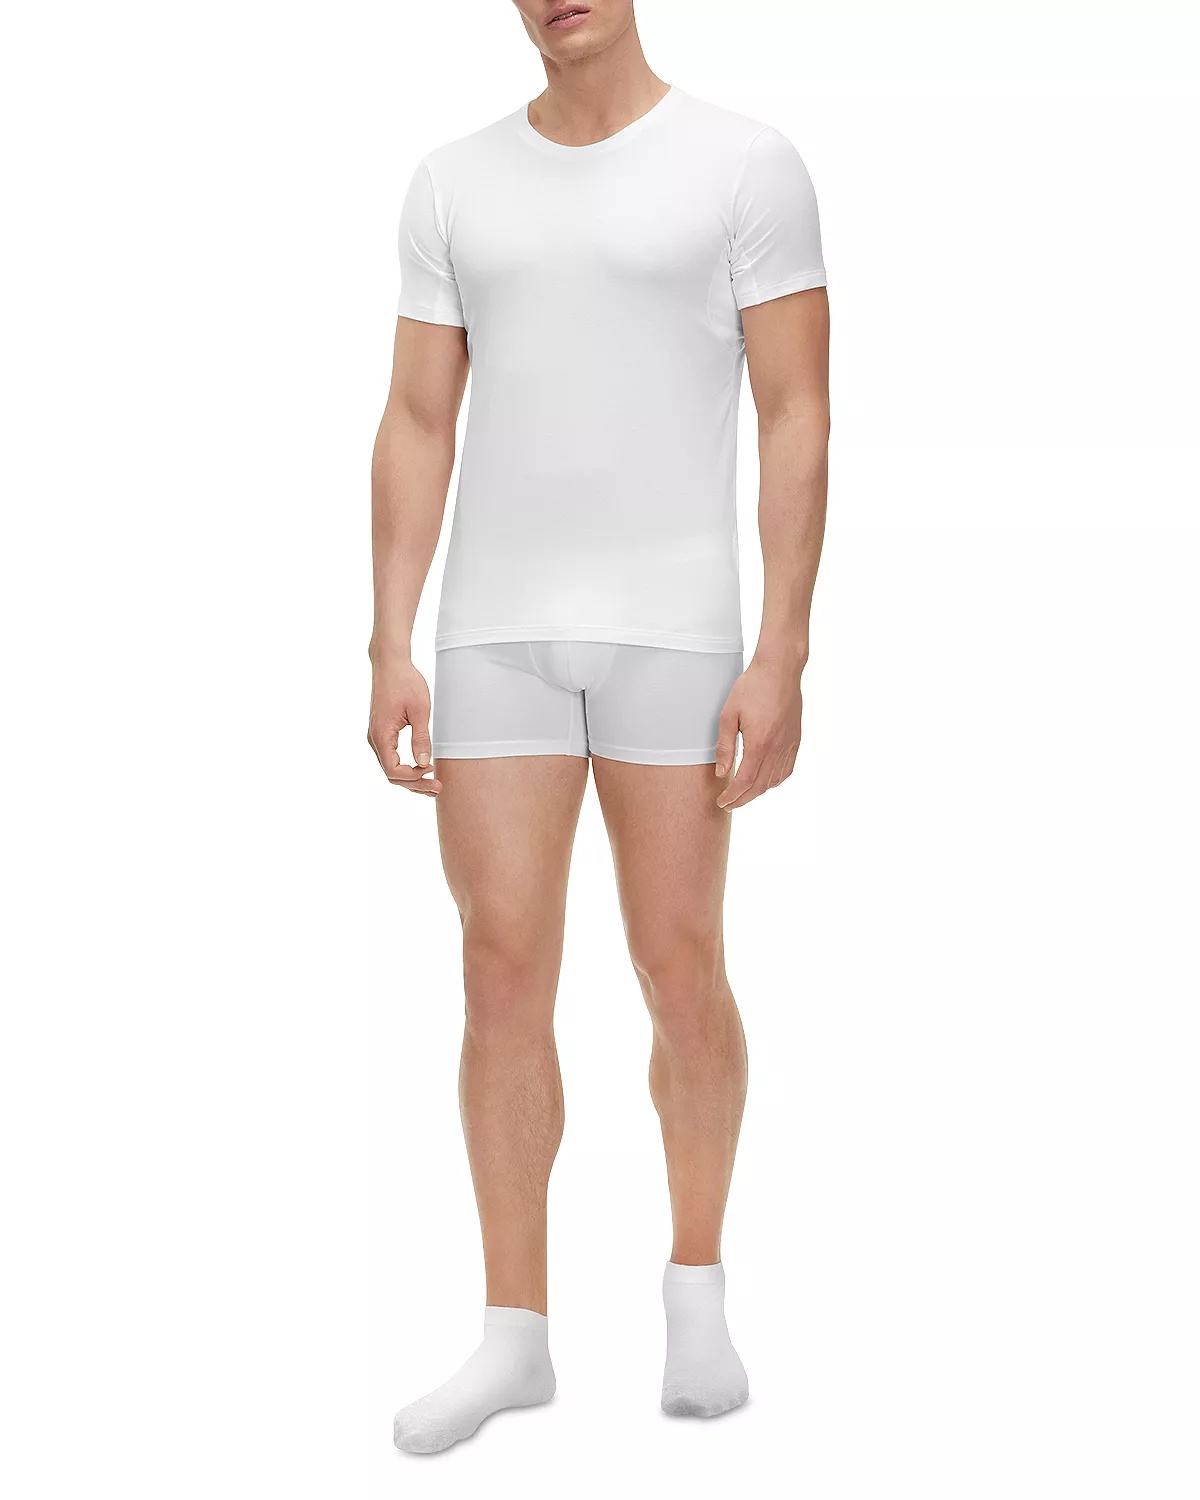 Outlast Climate Control Undershirt - 2